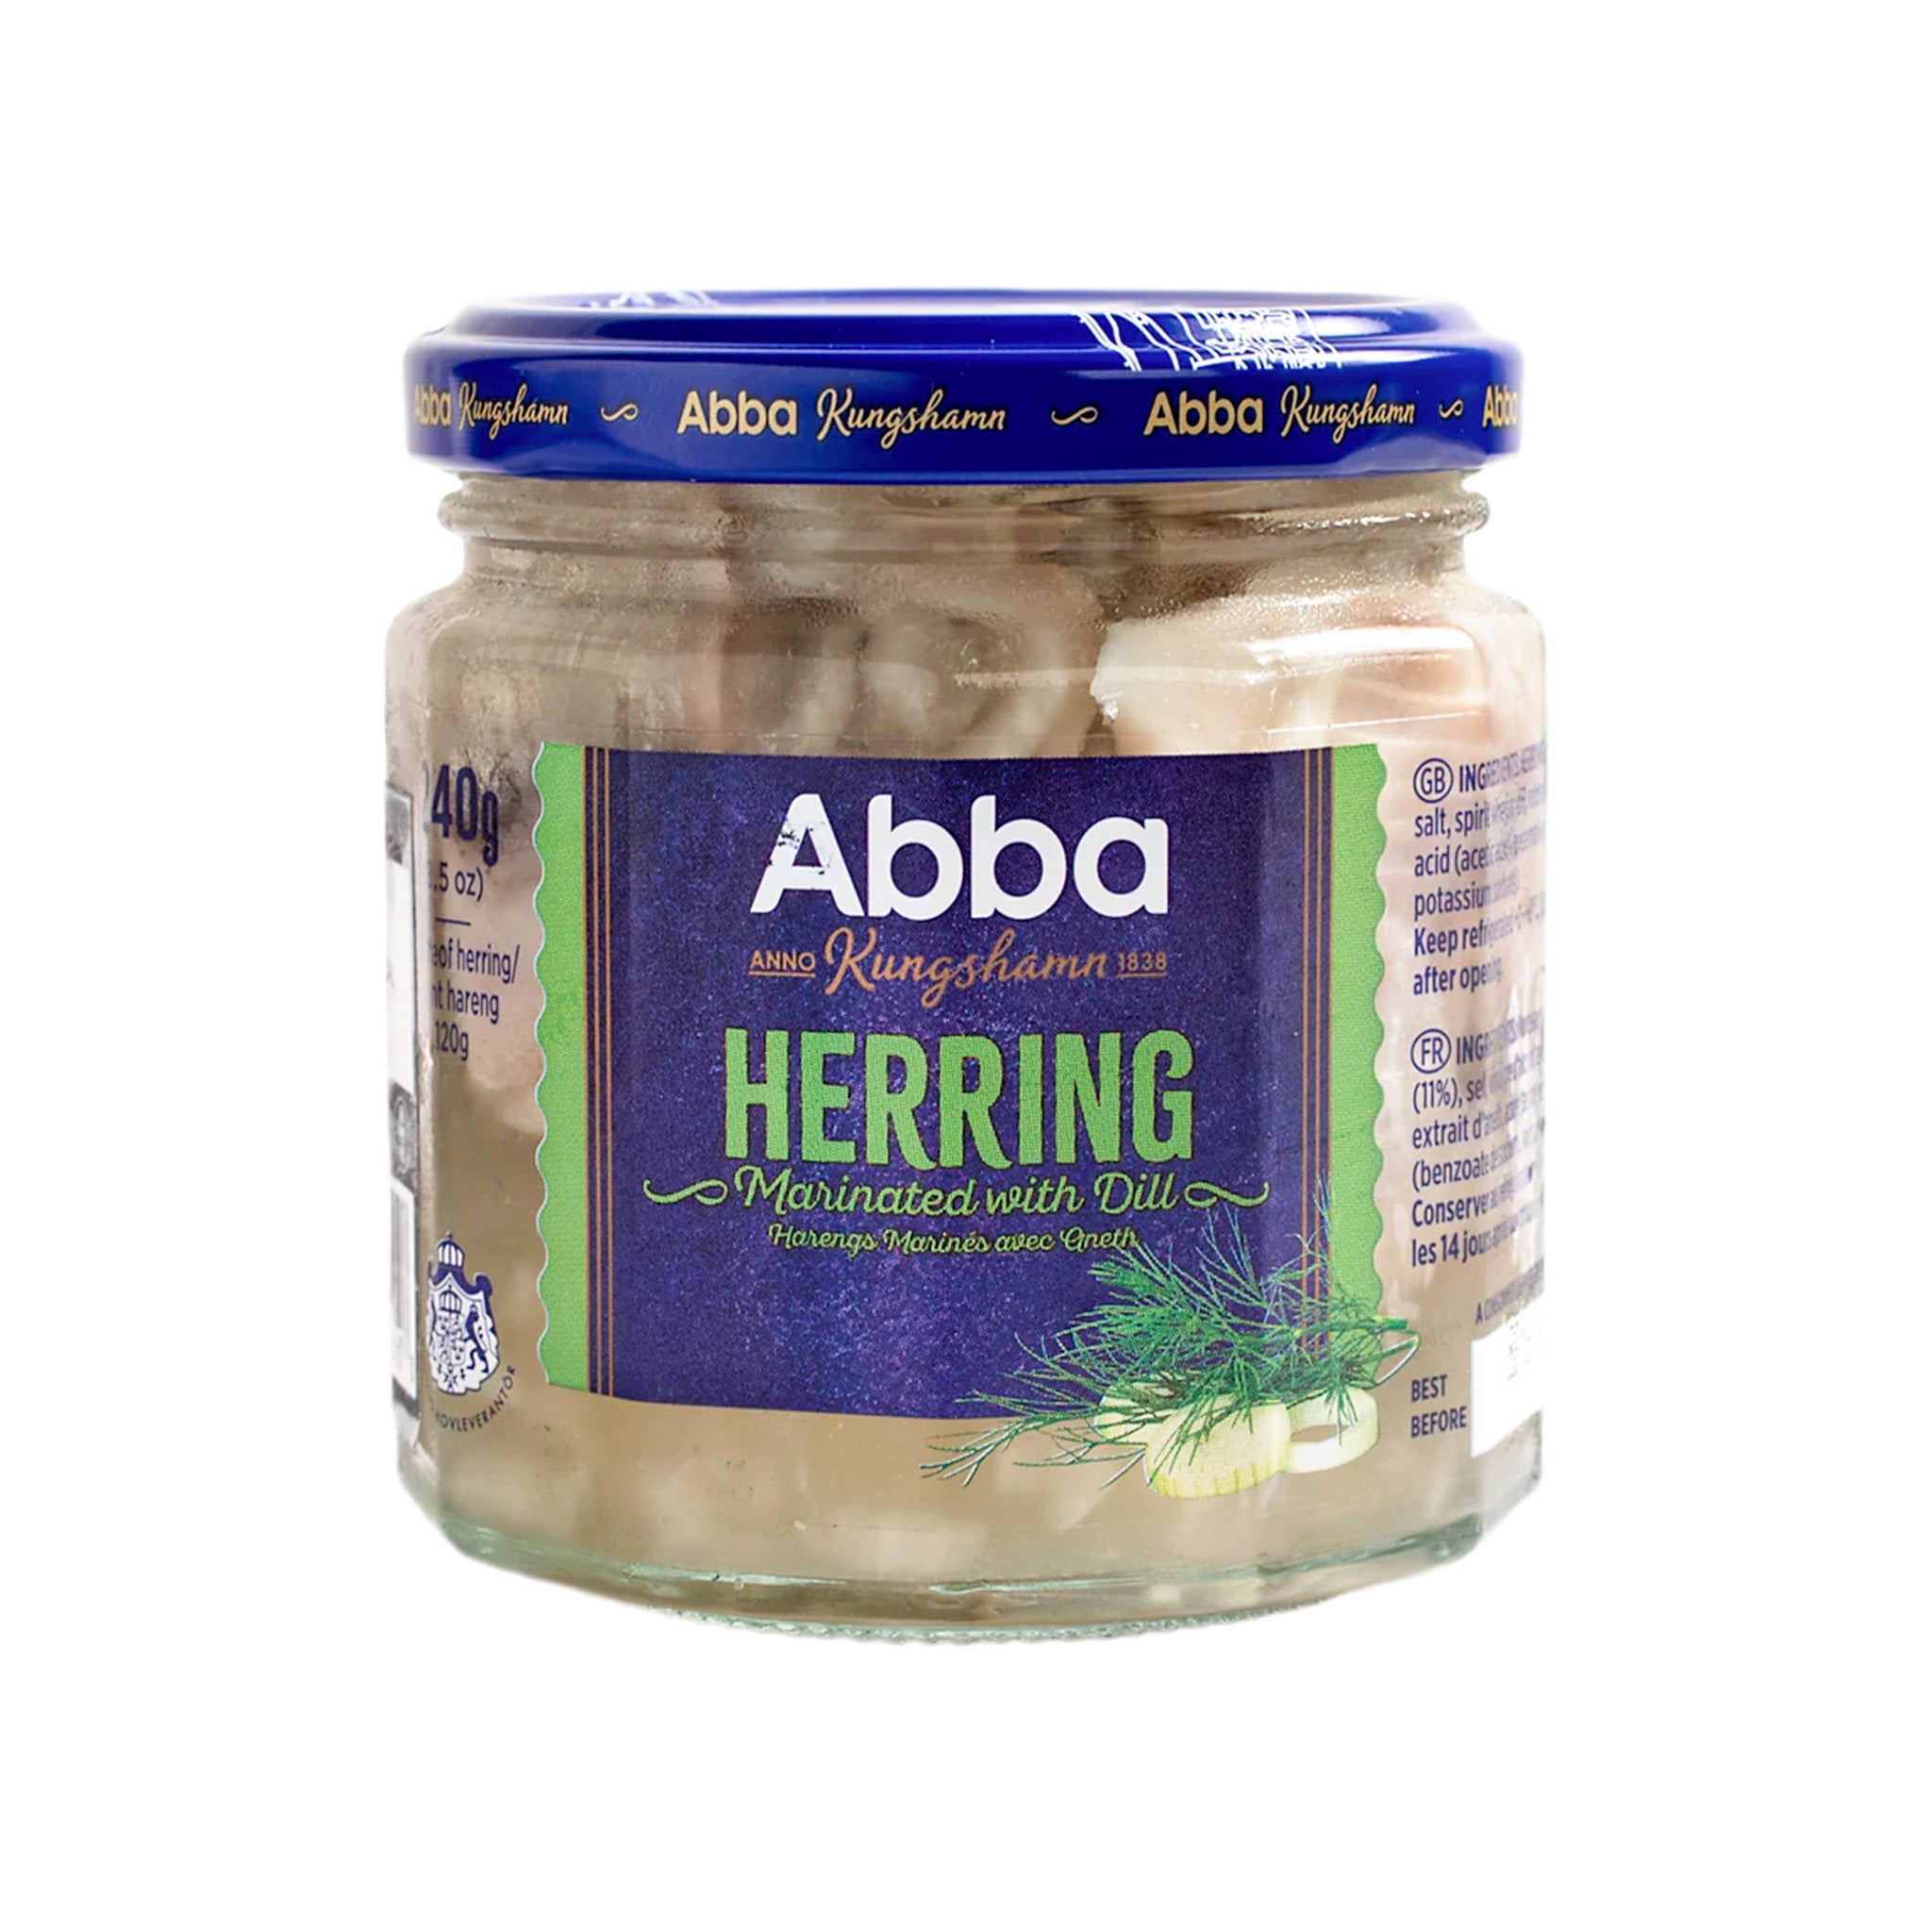 Abba Marinated Herring with Dill